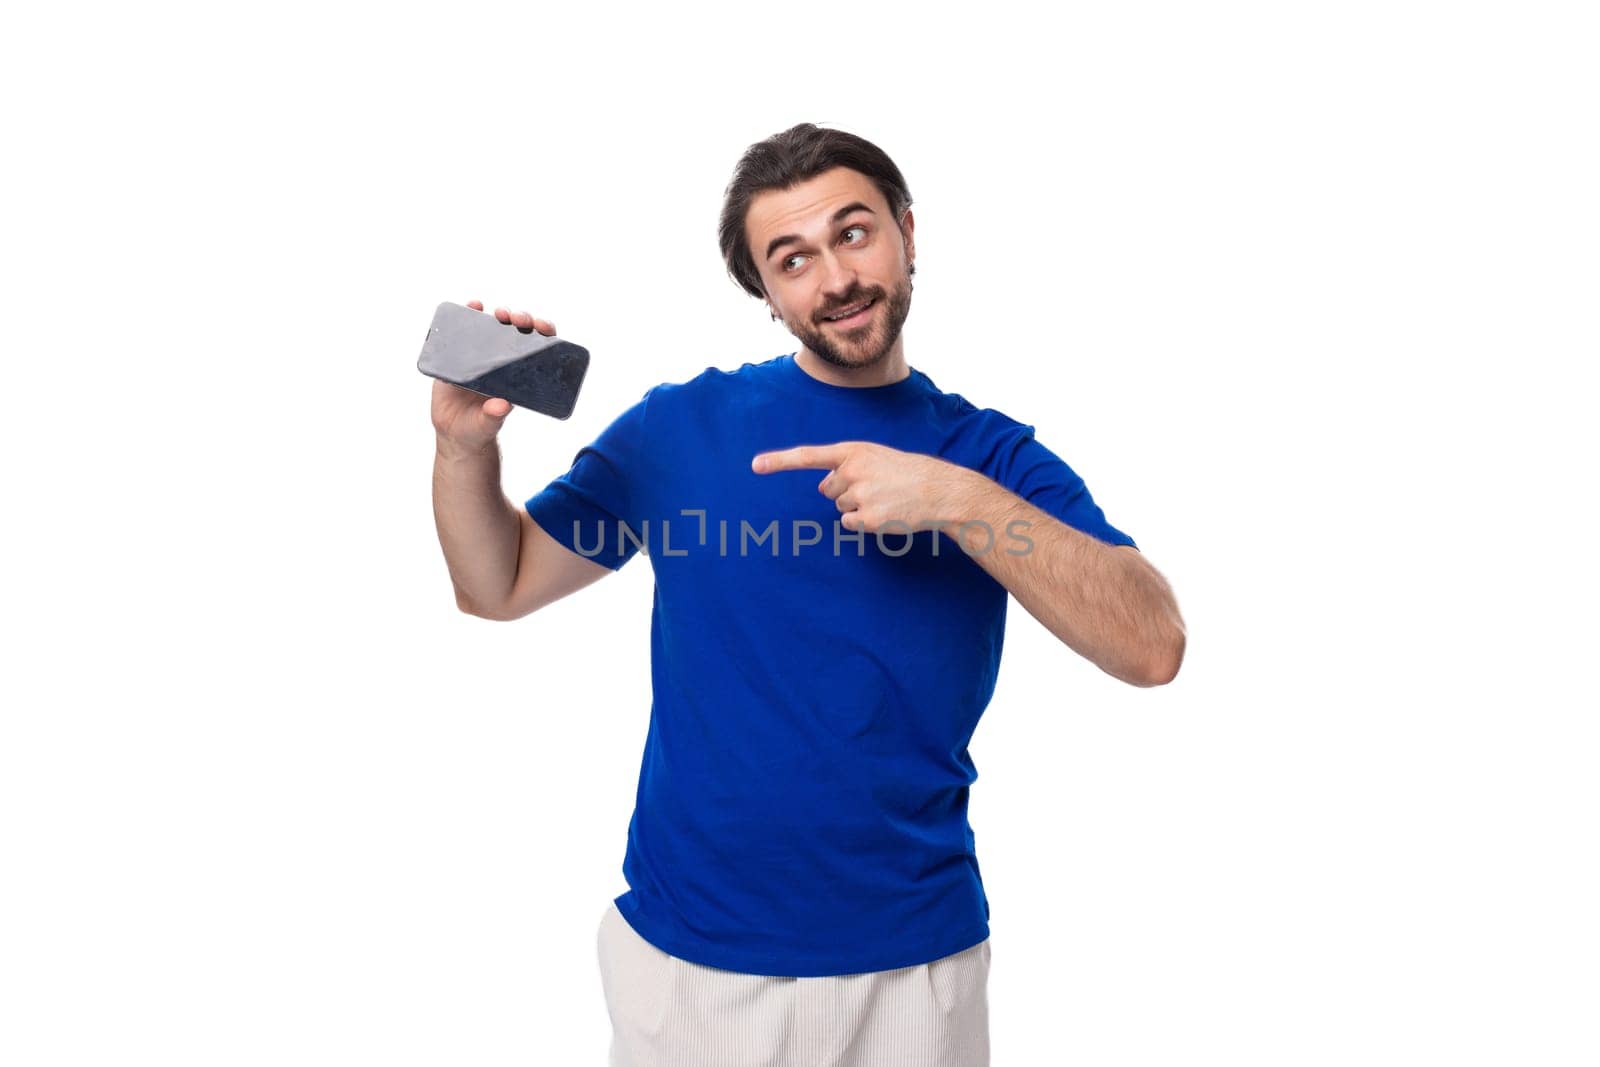 young attractive brunette man with a beard in a blue t-shirt holding a smartphone with a mockup on a white background with copy space.